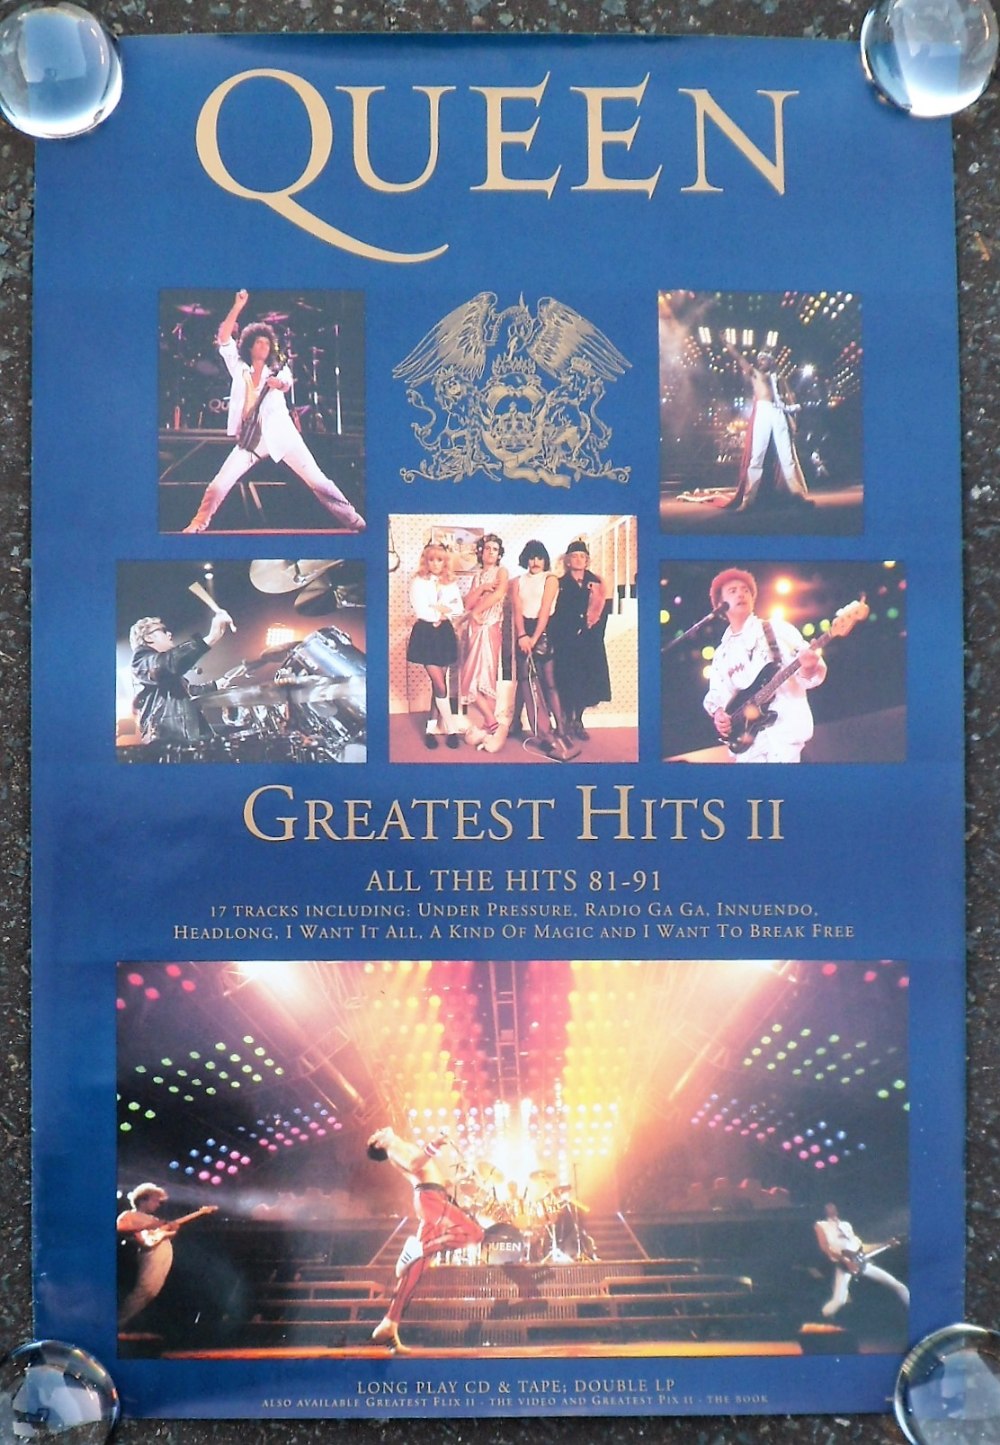 Music Posters, 6 posters comprising 3 1991 advertising posters for Queen Greatest Hits II offering